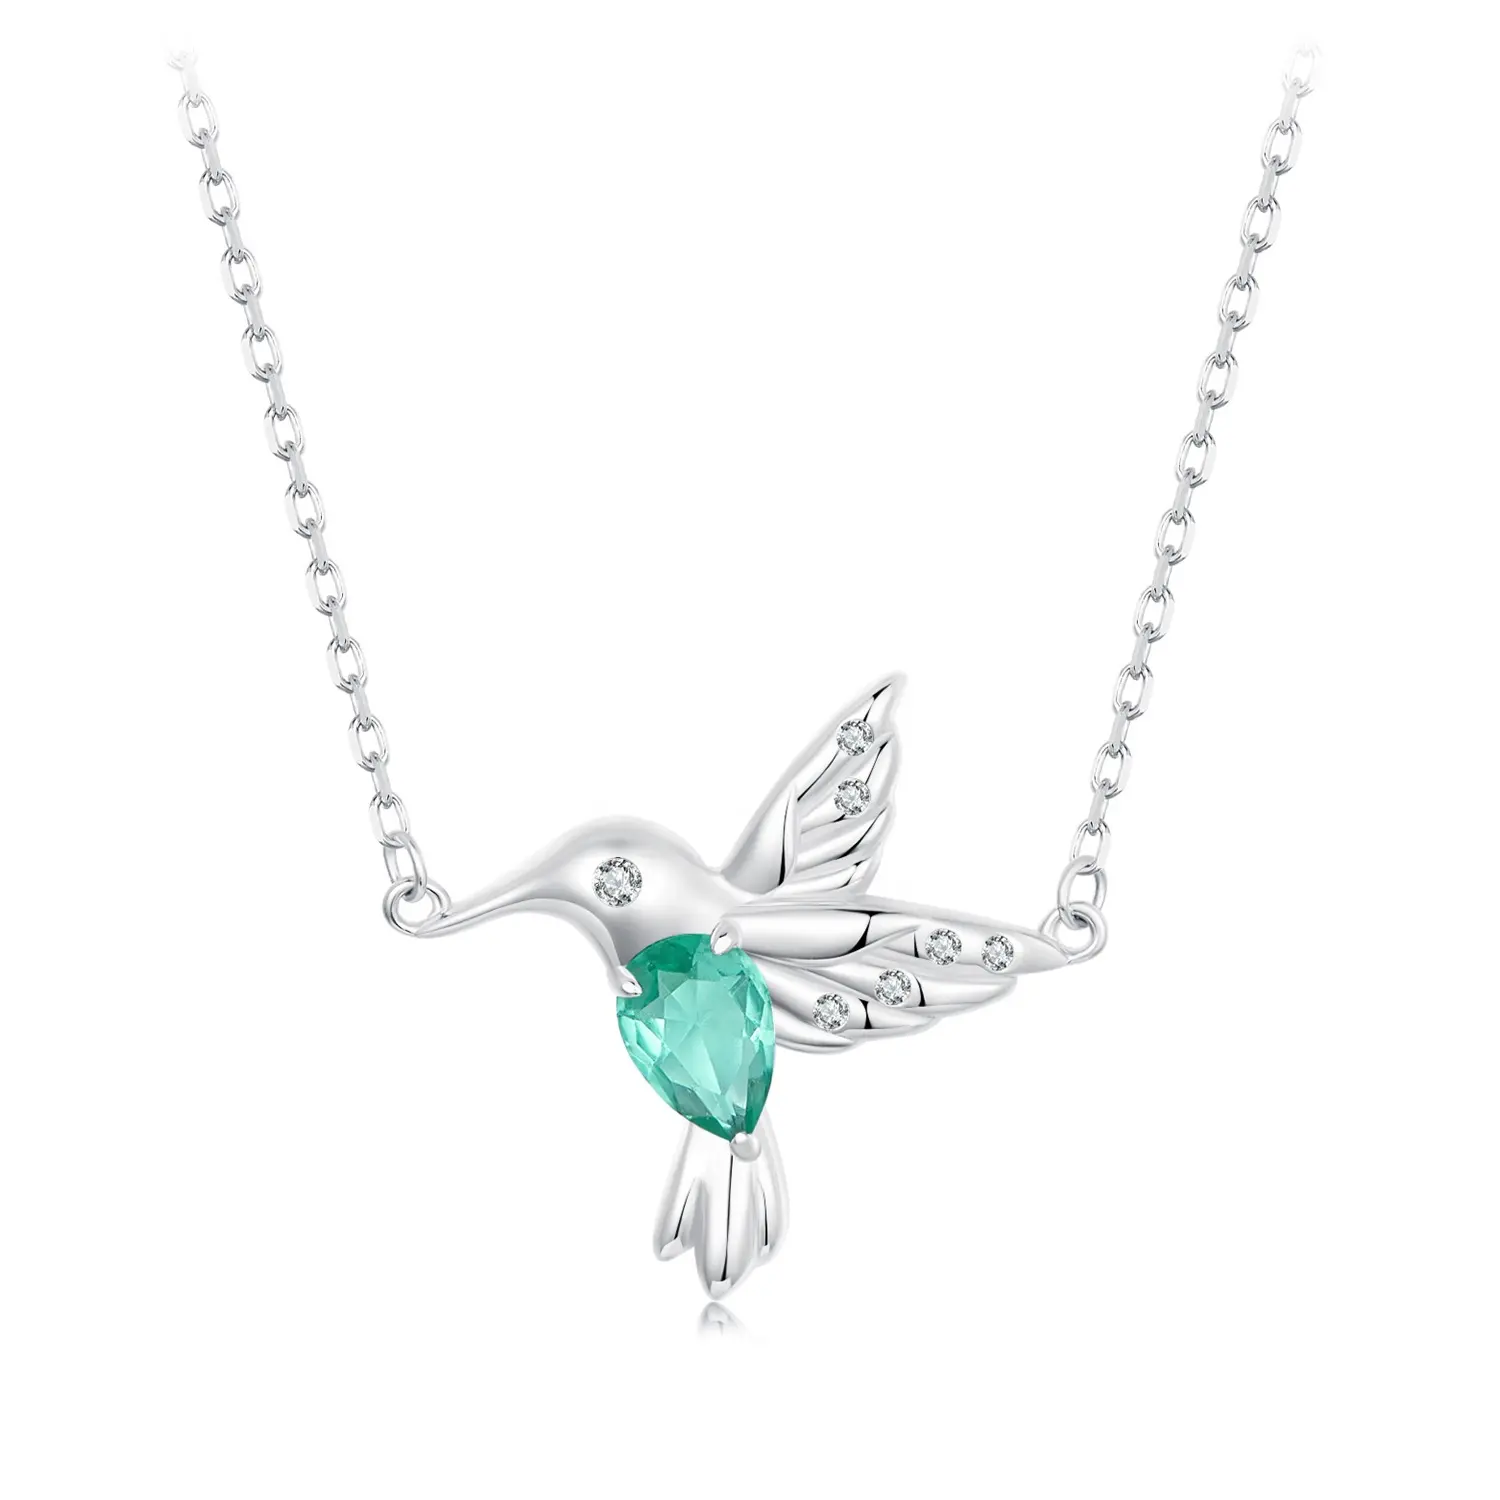 Youchuang bird dainty personalized jewellery necklace green glass best friend crafted 925 sterling silver necklaces for women